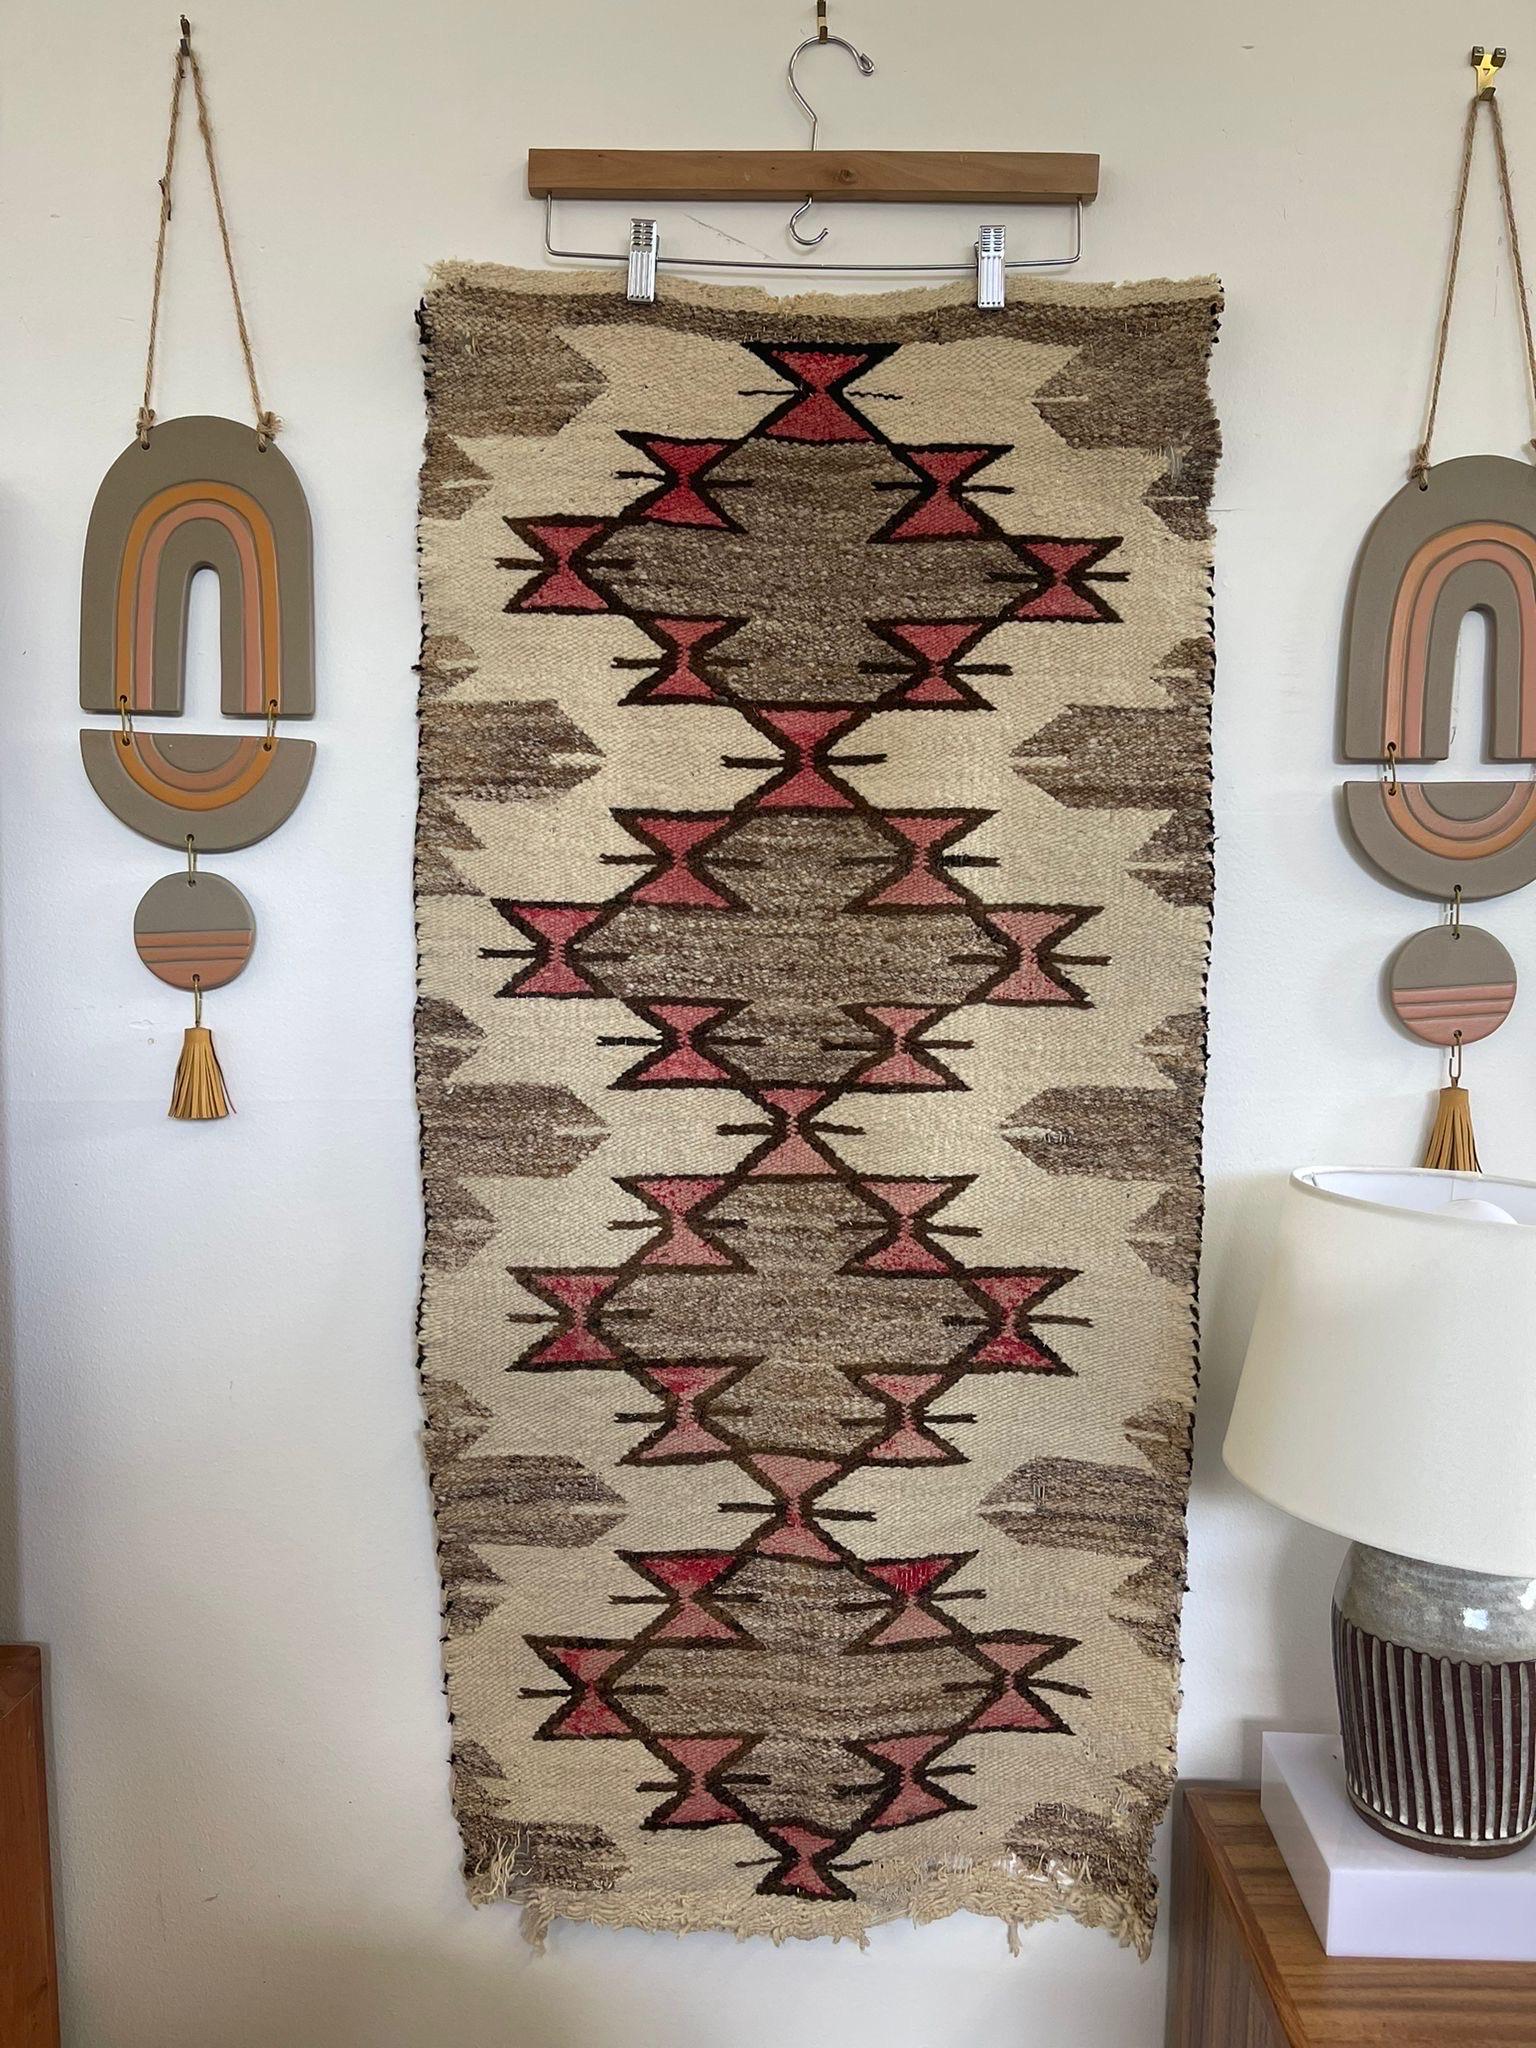 Primitive, traditional hourglass patterning on beige tone background. Corners are slightly frayed. Vintage Condition Consistent with Age as Pictured.

Dimensions. 44 L ; 21 W